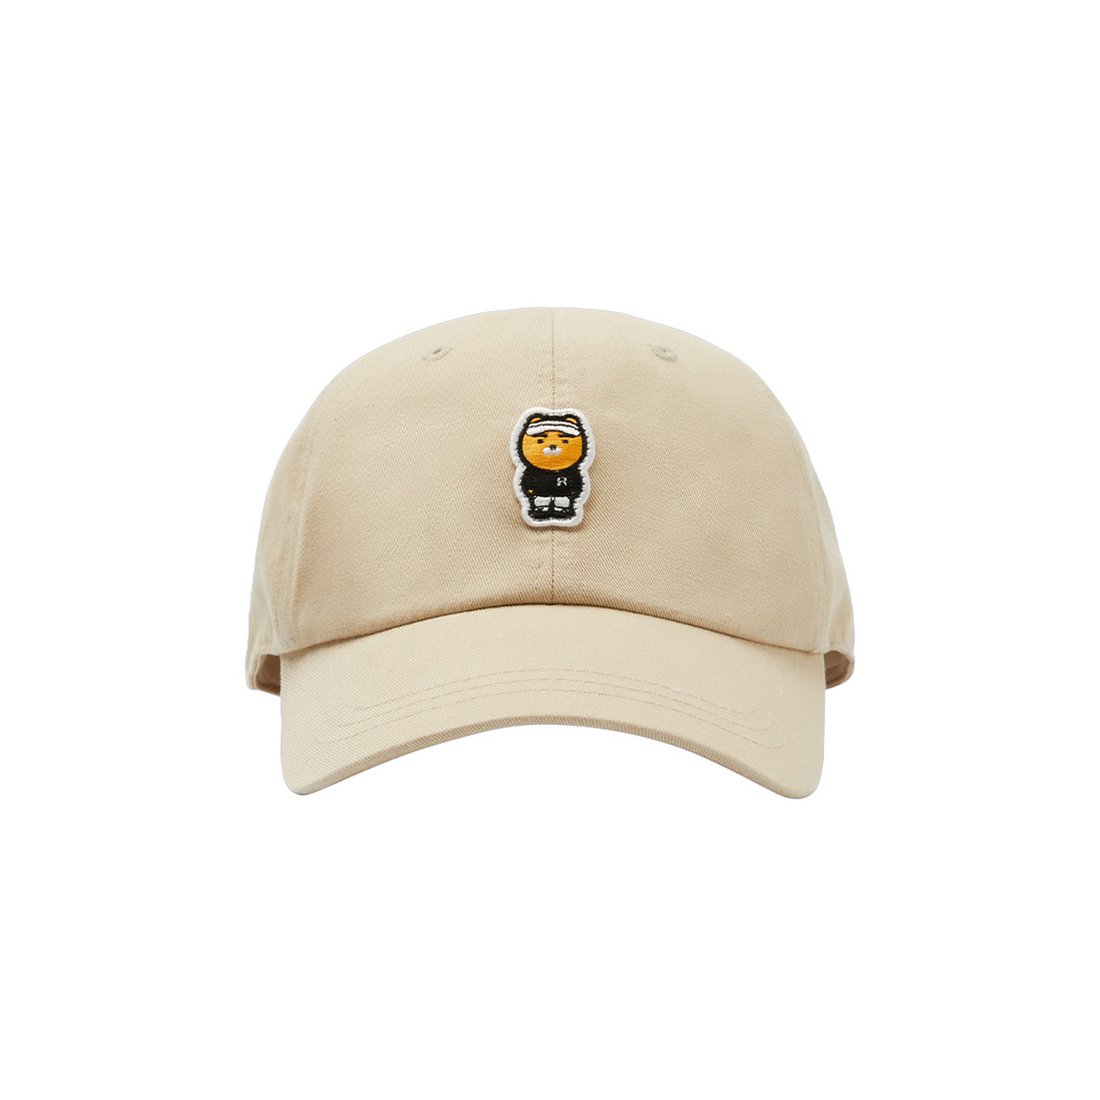 Kakao Friends: Let’s Party Ball Cap – Ryan (Beige) 렛츠파티 볼캡 - 라이언 (베이지)